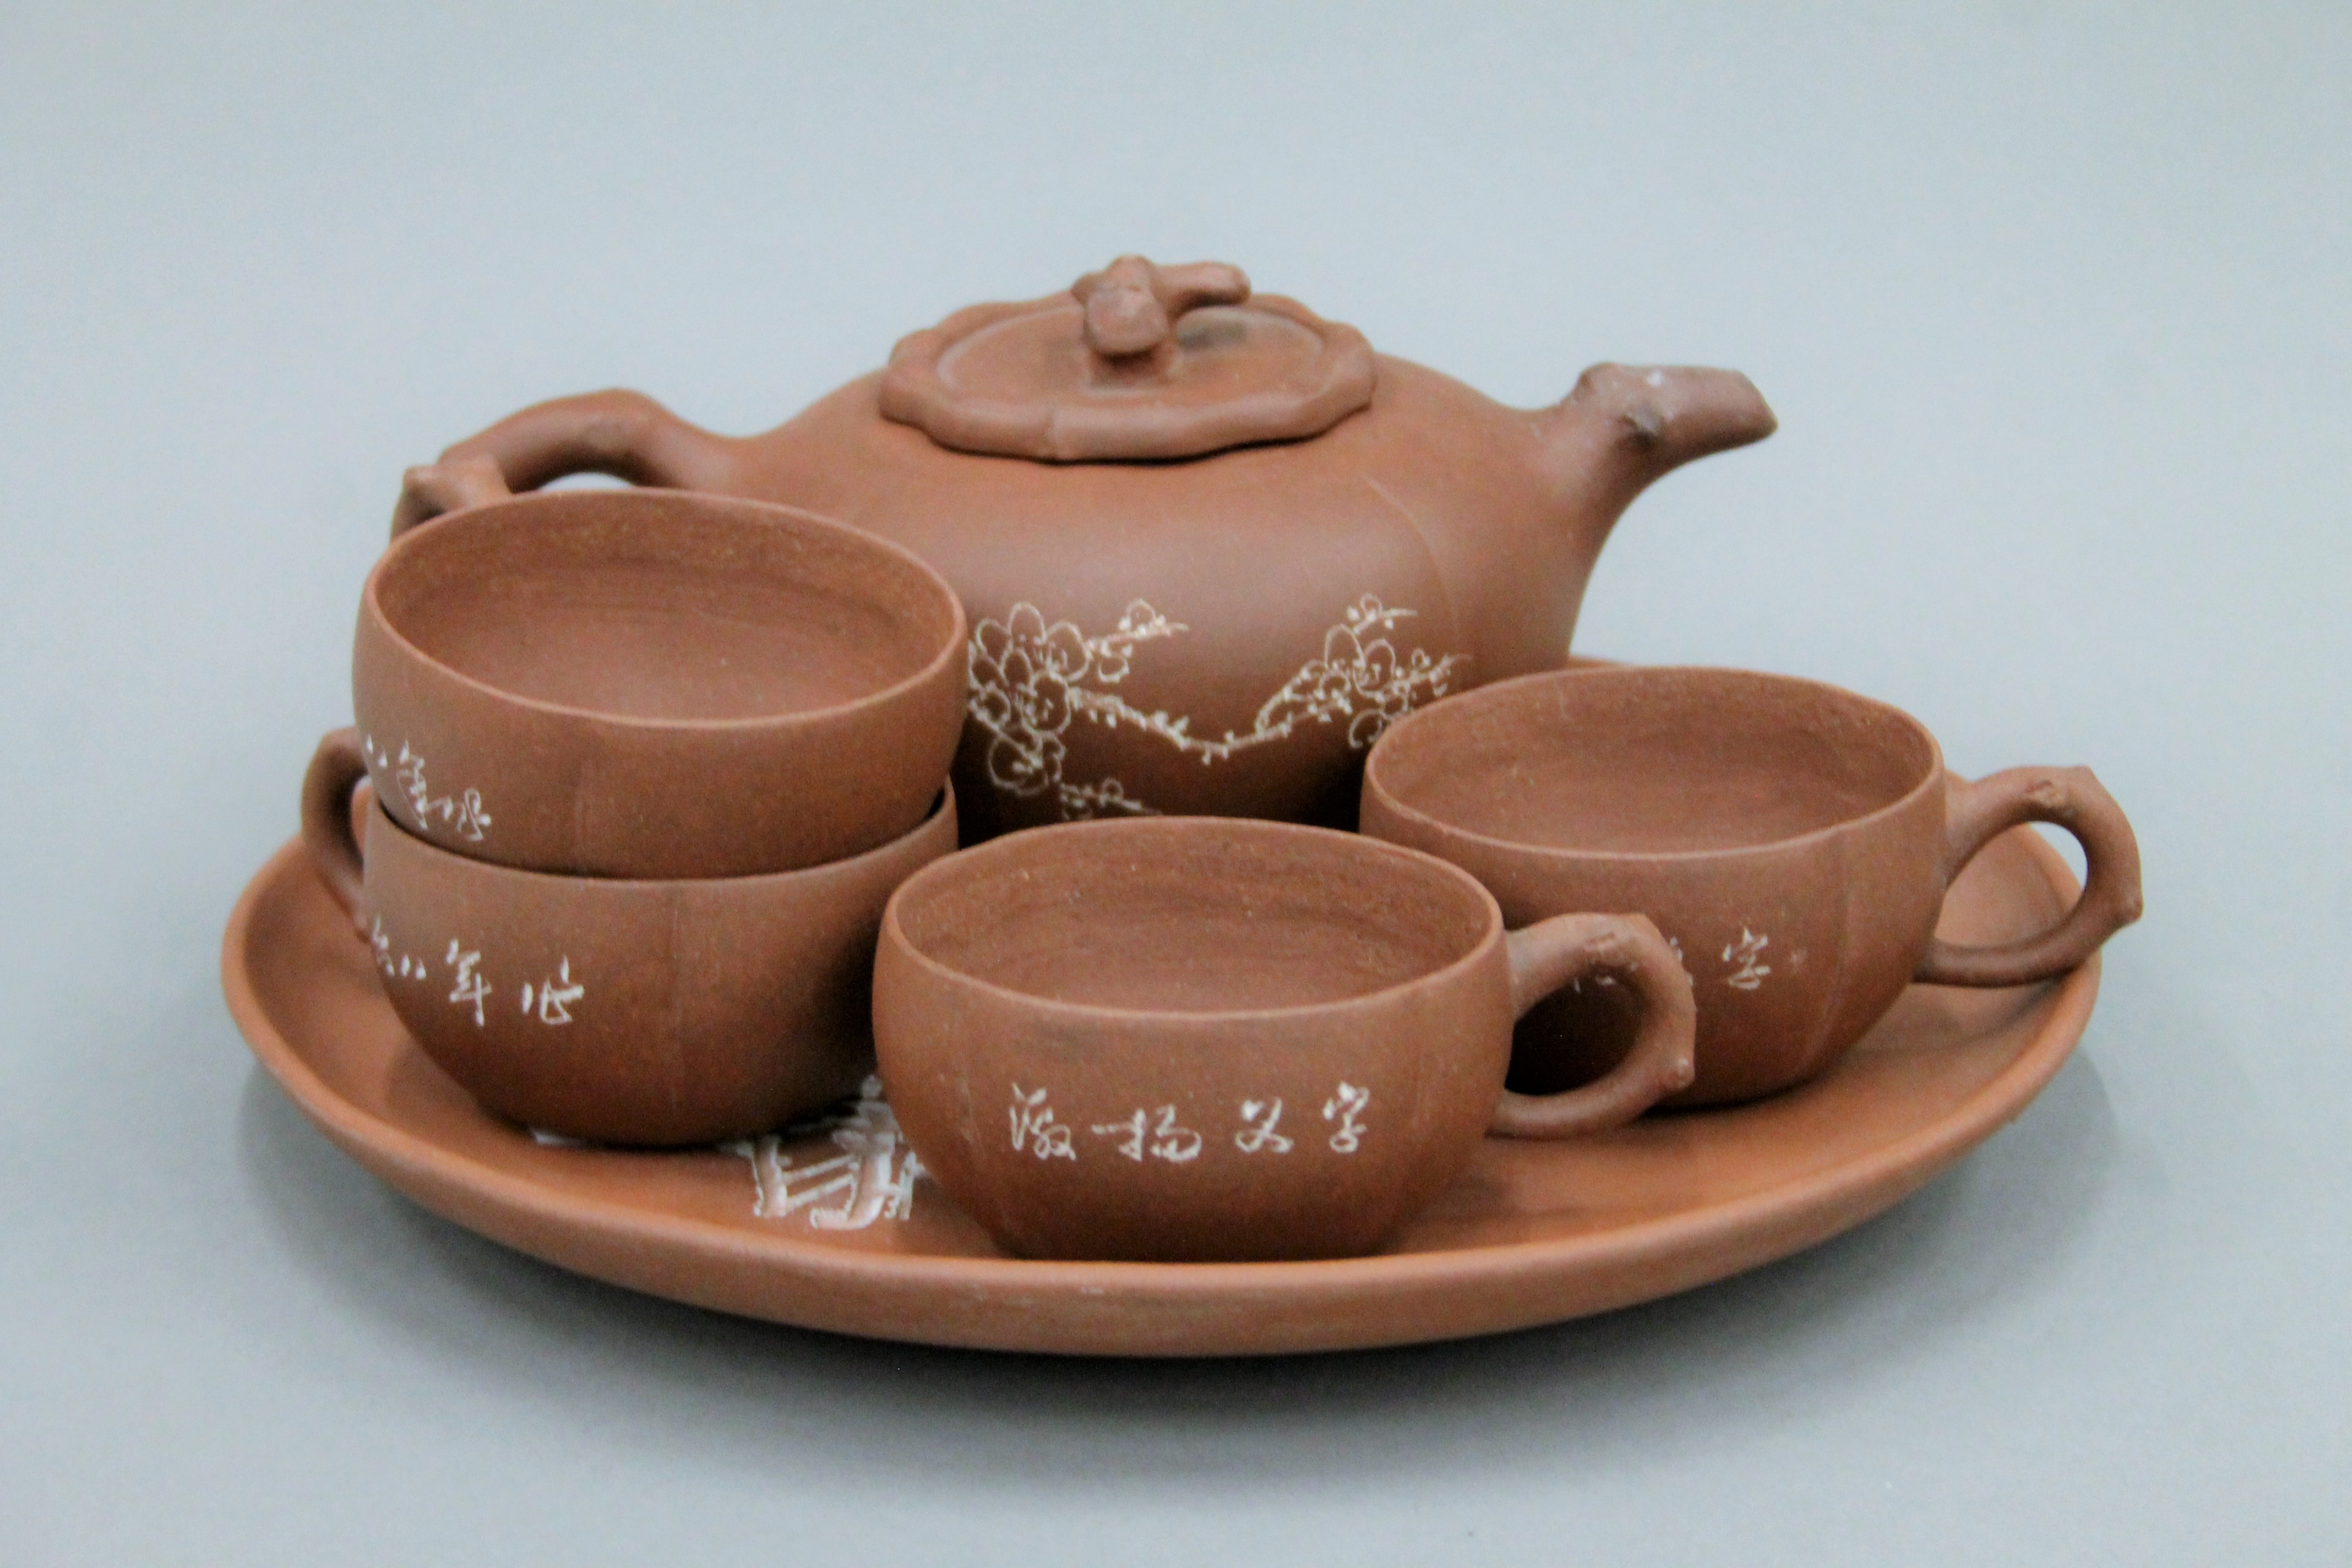 A Y-Hsing tea set comprising: a teapot, four cups and a tray, all with incised decoration.